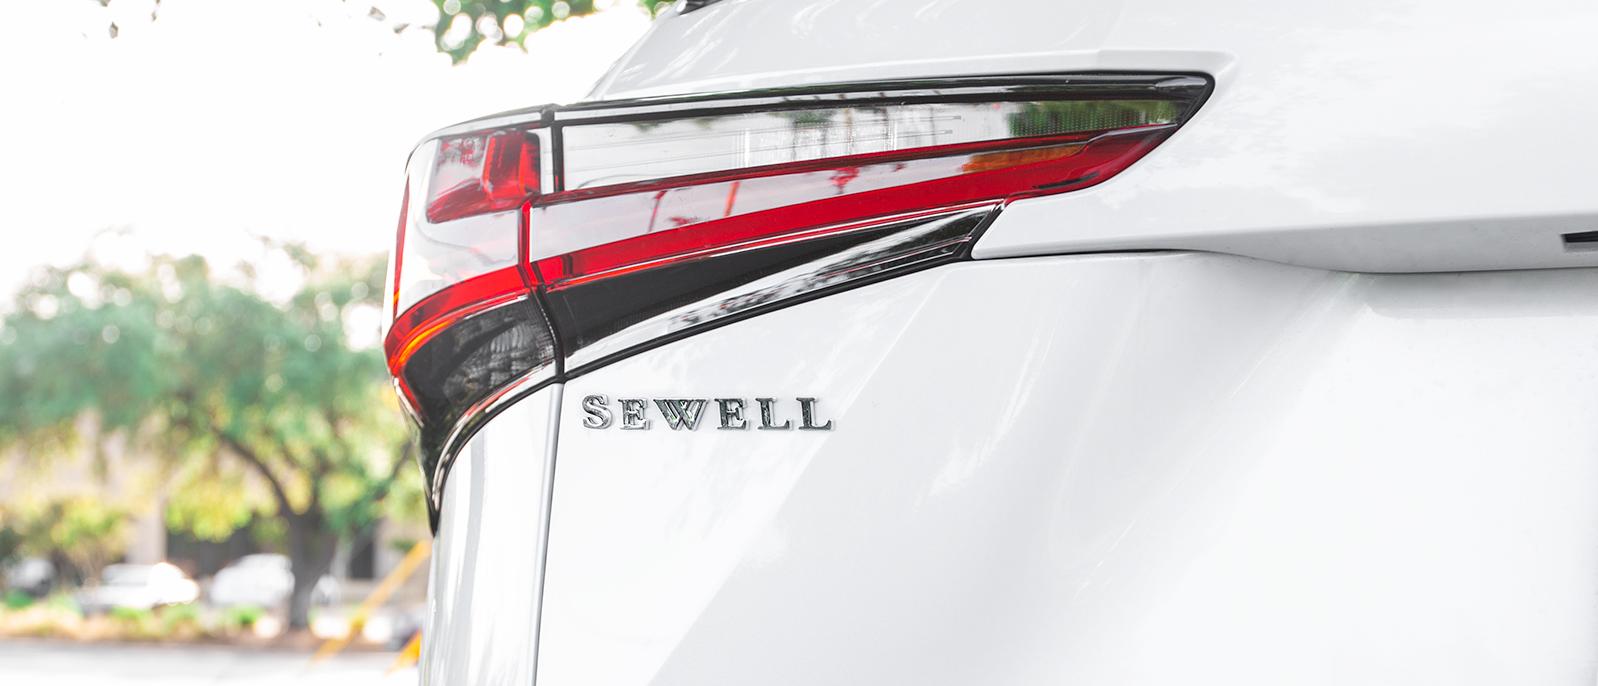 Sewell Certified Pre Owned Program Benefits Sewell Automotive Companies